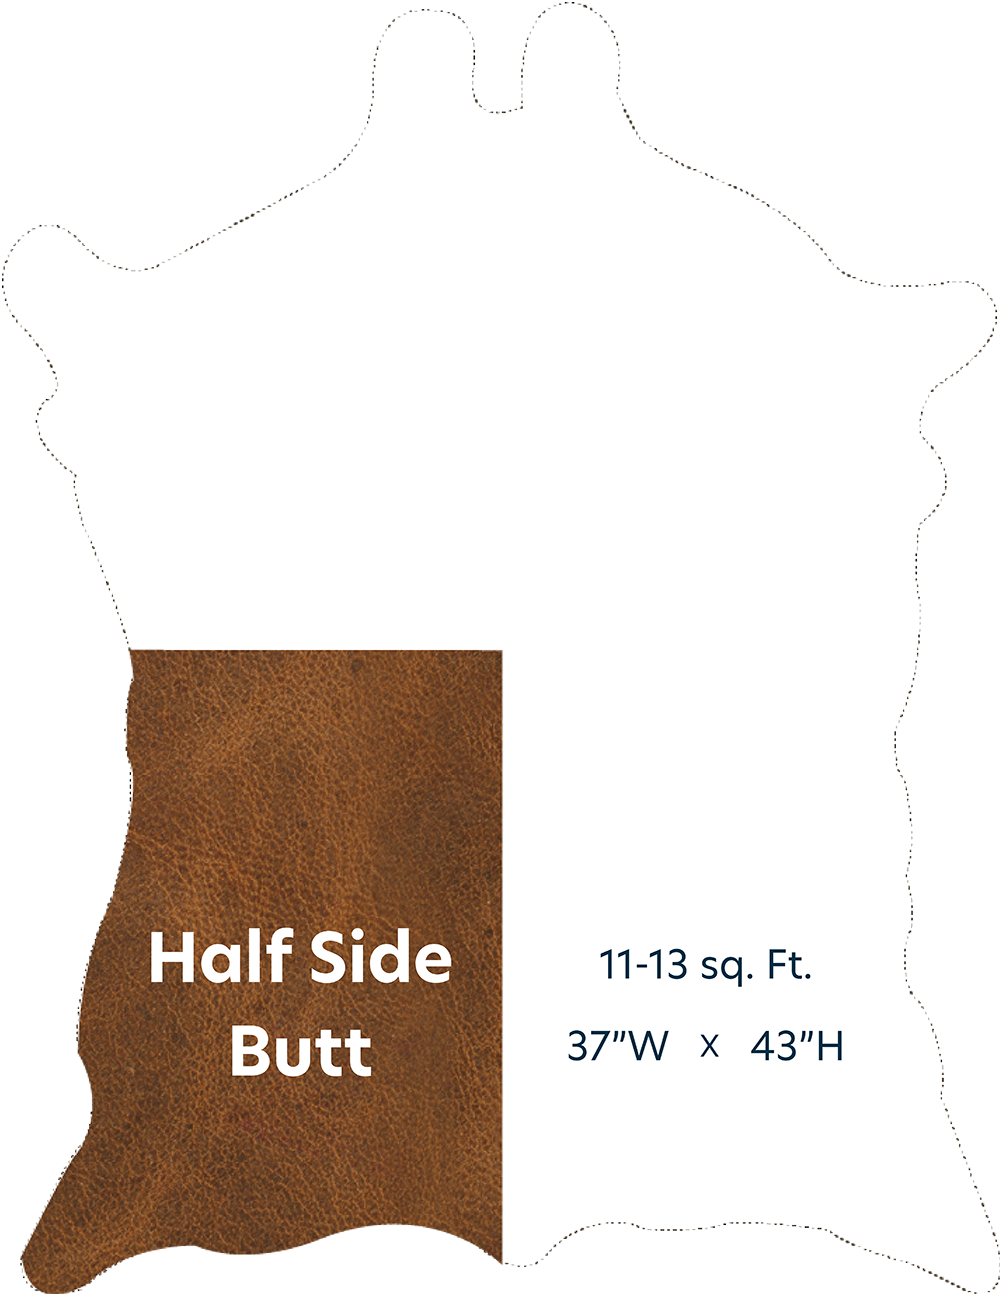 Half Side Butt with Dimensions